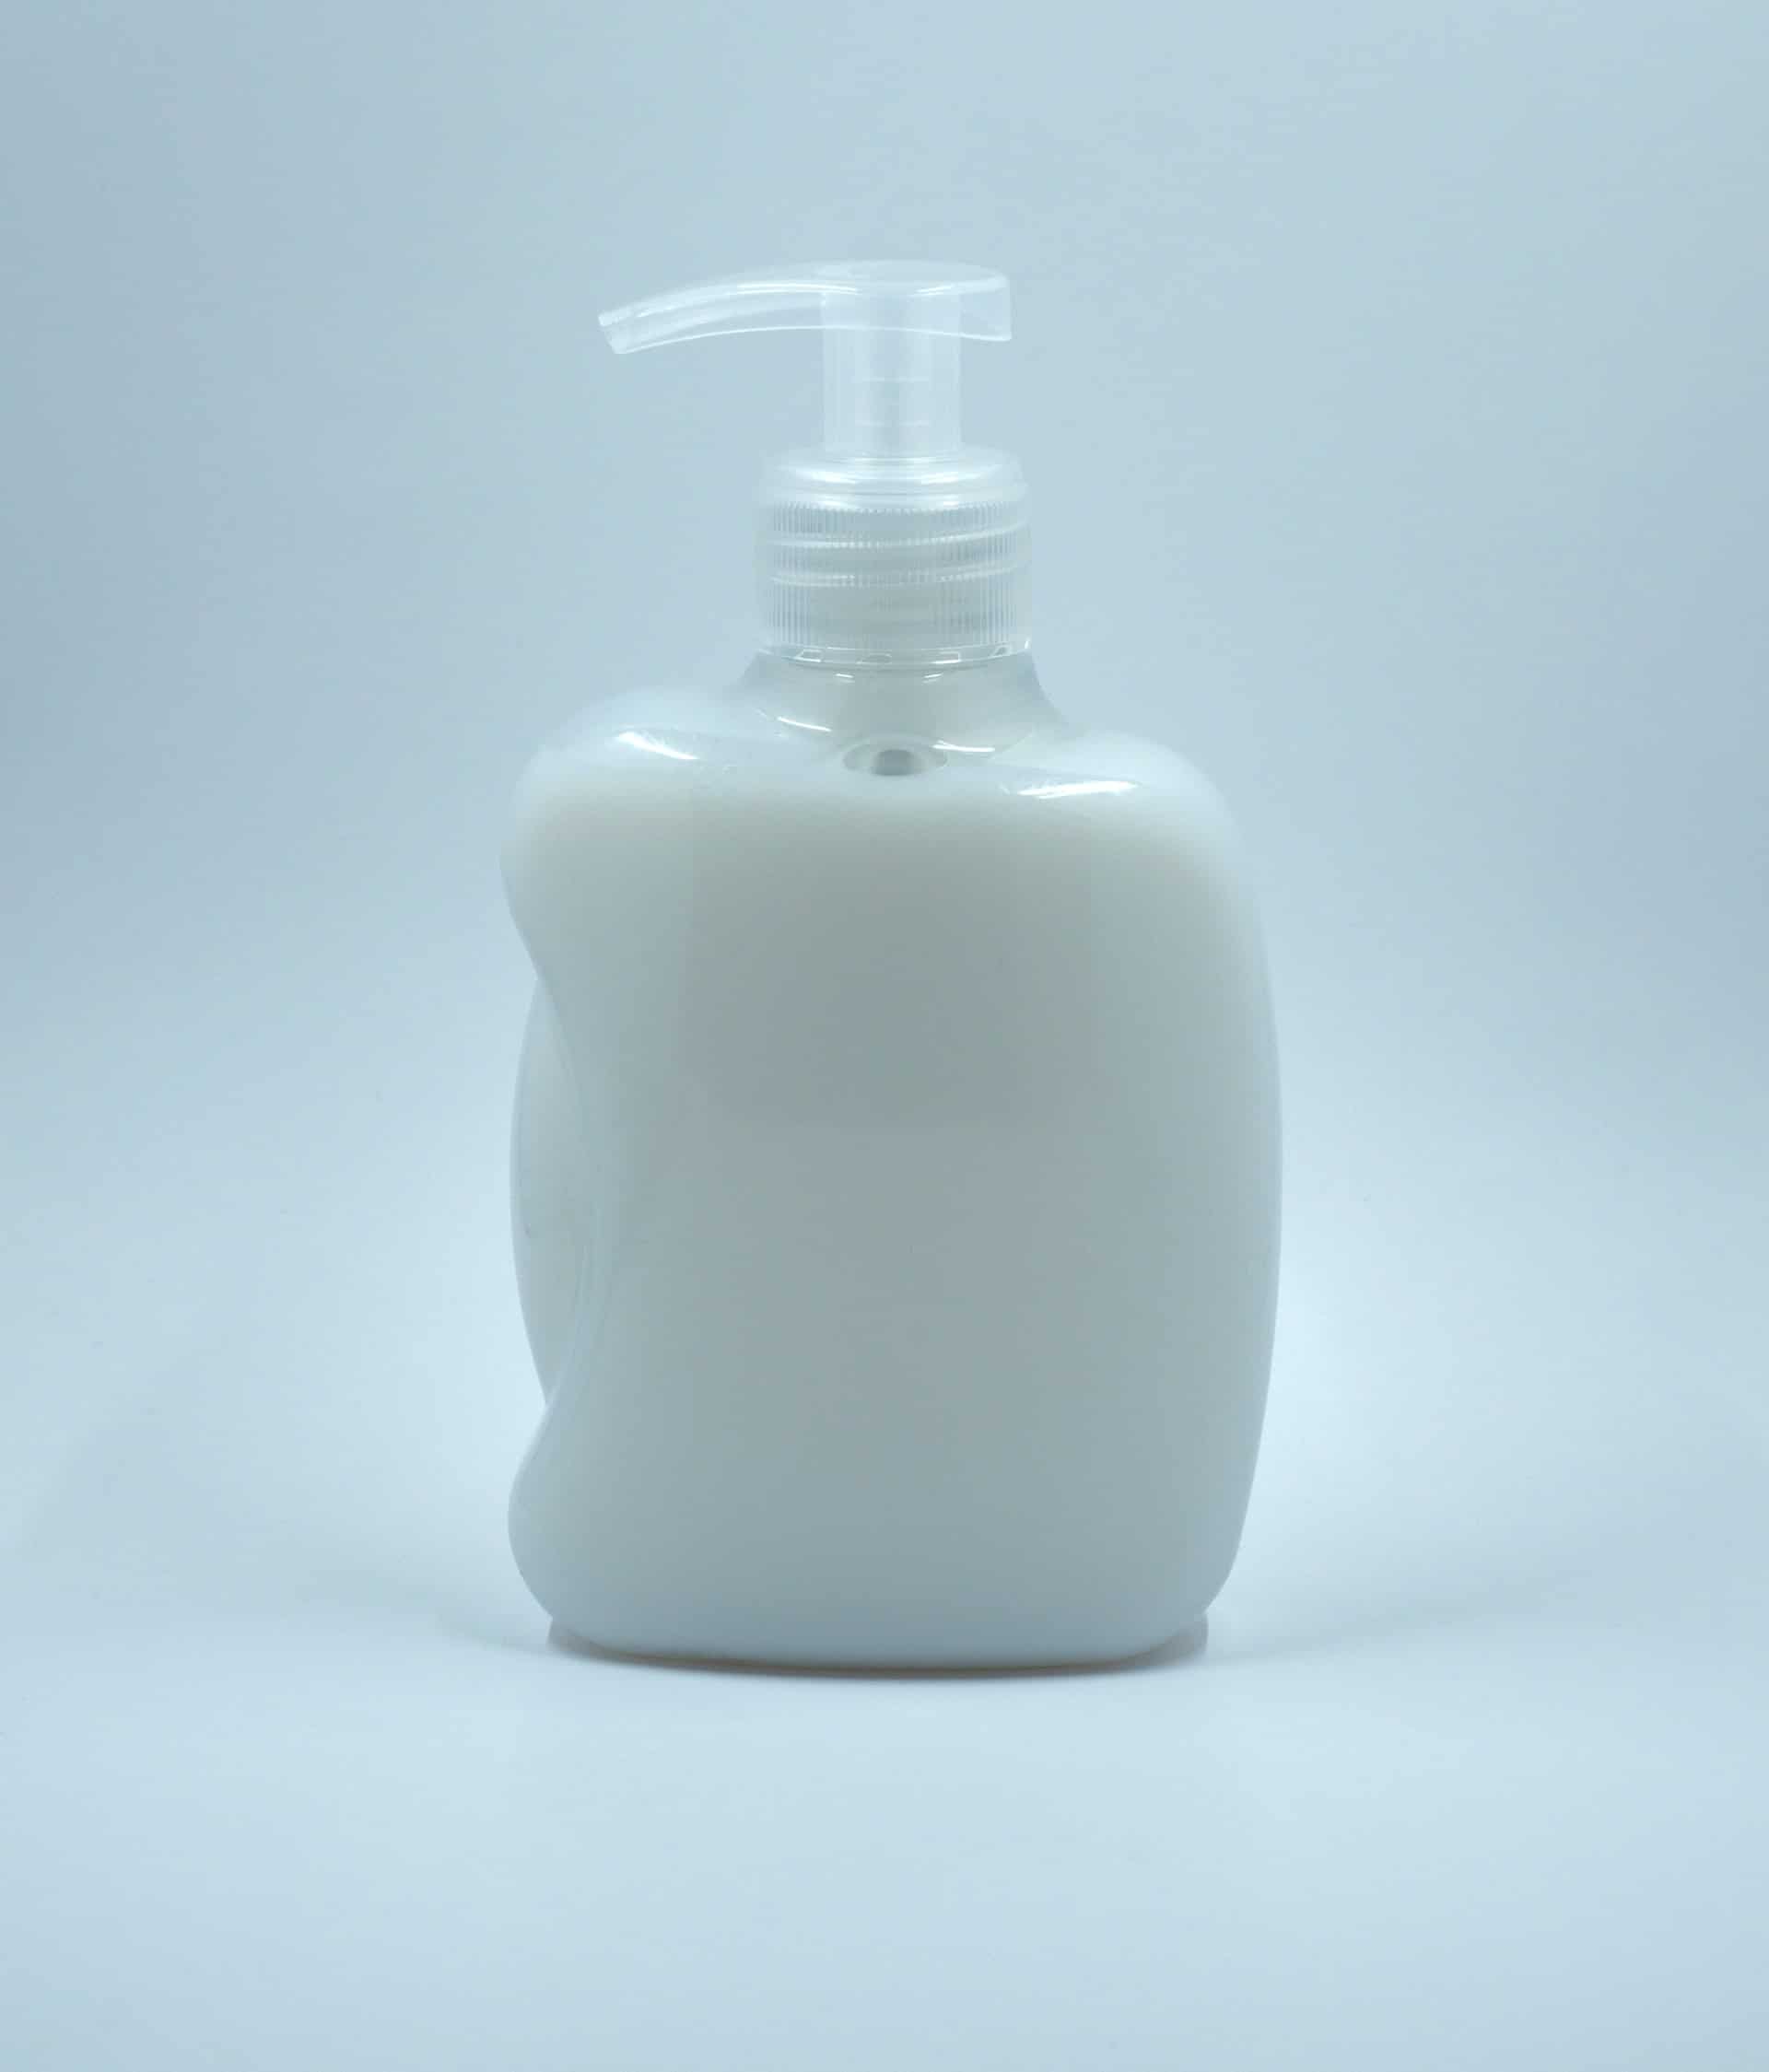 How to choose the Best Liquid Hand Soap for Your Home